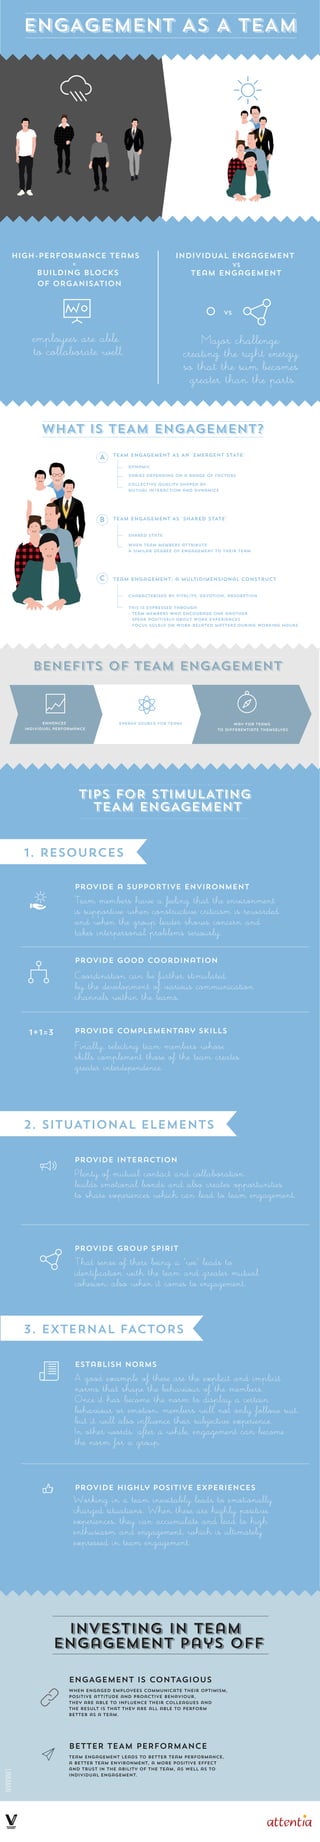 Investing in team
engagement pays off
WHAT IS TEAM ENGAGEMENT?
TEAM ENGAGEMENT AS AN 'EMERGENT STATE'
TEAM ENGAGEMENT AS 'SHARED STATE'
dynamiC
shared state
when team members attribute
a similar degree of engagement to their team
varies depending on a range of factors
collective quality shaped by
mutual interaction and dynamics
A
B
C Team Engagement: a multidimensional construct
characterised by vitality, devotion, absorption
this is expressed through:
- team members who encourage one another
- speak positively about work experiences
- focus solely on work-related matters during working hours
Provide a supportive environment
Team members have a feeling that the environment
is supportive when constructive criticism is rewarded
and when the group leader shows concern and
takes interpersonal problems seriously.
Provide interaction
Plenty of mutual contact and collaboration
builds emotional bonds and also creates opportunities
to share experiences which can lead to team engagement.
Coordination can be further stimulated
by the development of various communication
channels within the teams.
Provide good coordination
ENGAGEMENT IS CONTAGIOUS
When engaged employees communicate their optimism,
positive attitude and proactive behaviour,
they are able to influence their colleagues and
the result is that they are all able to perform
better as a team.
BETTER TEAM PERFORMANCE
Team engagement leads to better team performance,
a better team environment, a more positive effect
and trust in the ability of the team, as well as to
individual engagement.
Major challenge:
creating the right energy
so that the sum becomes
greater than the parts.
INDIVIDUAL engagement
team engagement
VS
employees are able
to collaborate well
high-performance teams
BUILDING BLOCKS
OF ORGANISATION
=
way for teams
to differentiate themselves
energy source for teams
TIPS FOR STIMULATING
TEAM ENGAGEMENT
VS
ENGAGEMENT AS A TEAM
enhances
individual performance
Finally, selecting team members whose
skills complement those of the team creates
greater interdependence.
Provide complementary skills1+1=3
1. Resources
2. SITUATIONAL ELEMENTS
Provide group spirit
That sense of there being a "we" leads to
identification with the team and greater mutual
cohesion, also when it comes to engagement.
Establish norms
A good example of these are the explicit and implicit
norms that shape the behaviour of the members.
Once it has become the norm to display a certain
behaviour or emotion, members will not only follow suit,
but it will also influence their subjective experience.
In other words, after a while, engagement can become
the norm for a group.
3. EXTERNAL FACTORS
Provide highly positive experiences
Working in a team inevitably leads to emotionally
charged situations. When these are highly positive
experiences, they can accumulate and lead to high
enthusiasm and engagement, which is ultimately
expressed in team engagement.
BENEFITS OF TEAM ENGAGEMENT
 